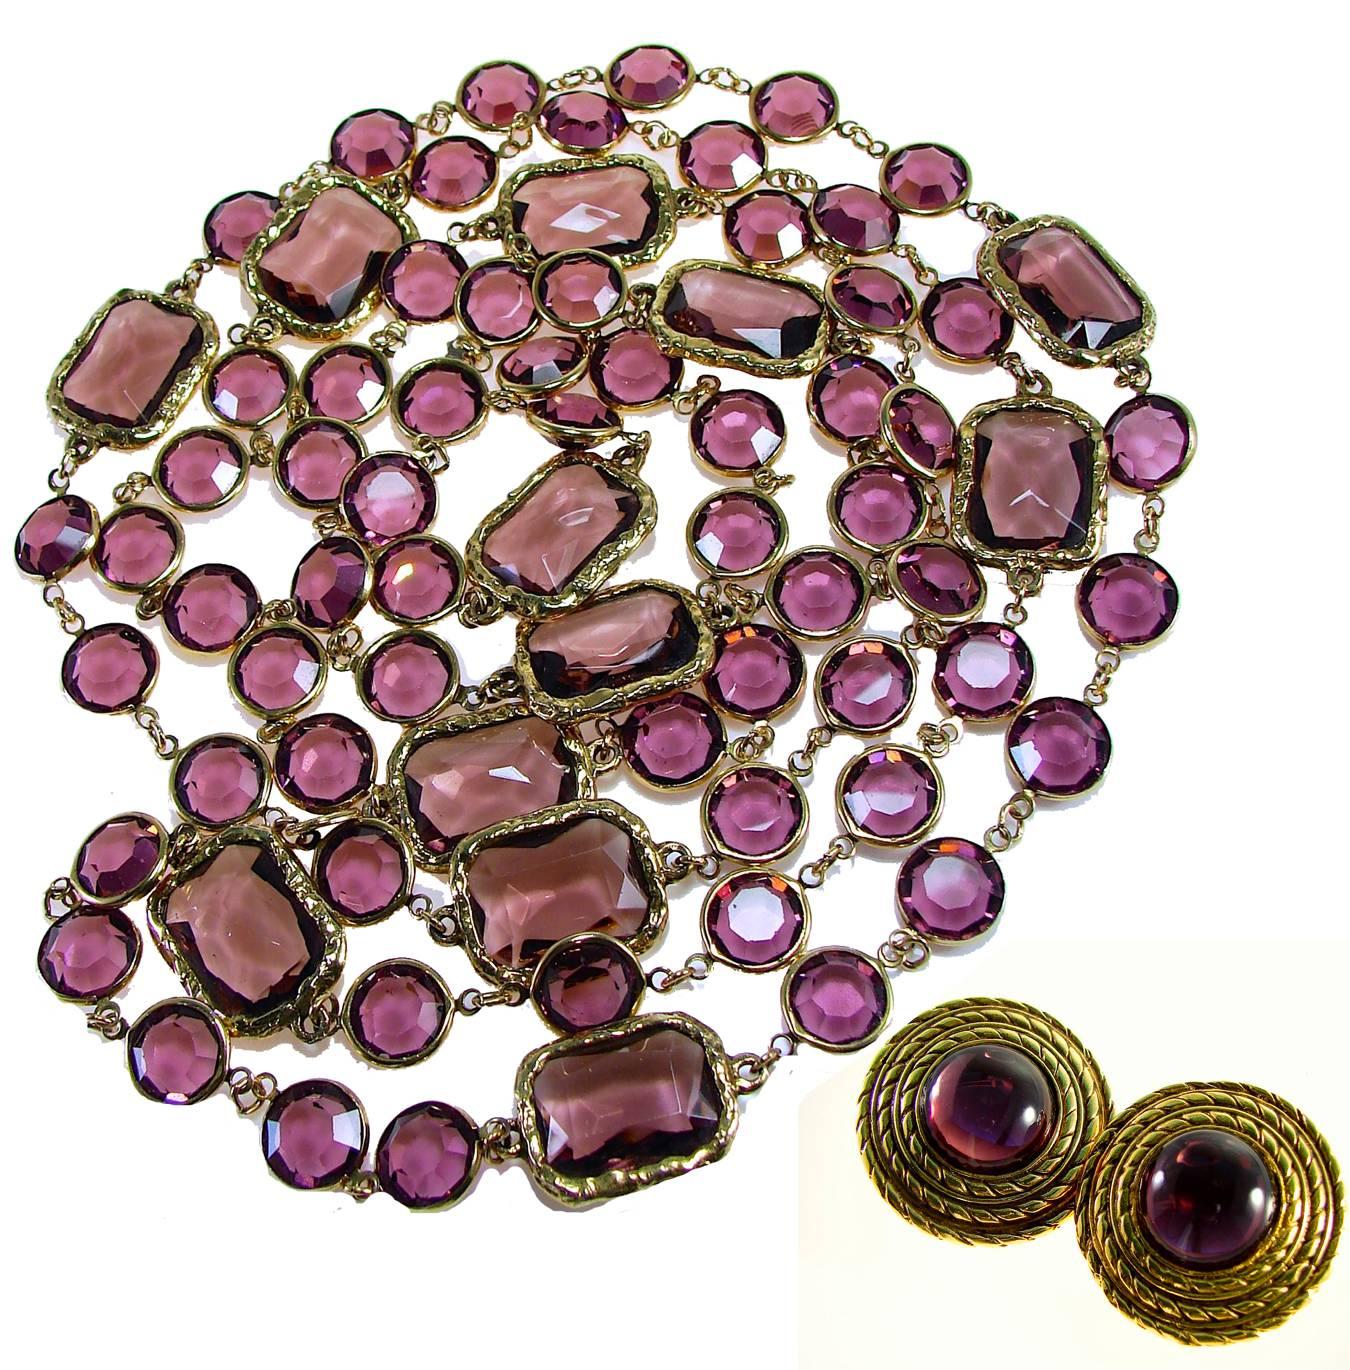 This fabulous demi-parure was made by Chanel in 1981, when Victoire de Castellane worked for the house.  This set includes a 60in opera length necklace and matching round poured glass clip earrings.  The necklace is an infinity strand with no clasp,